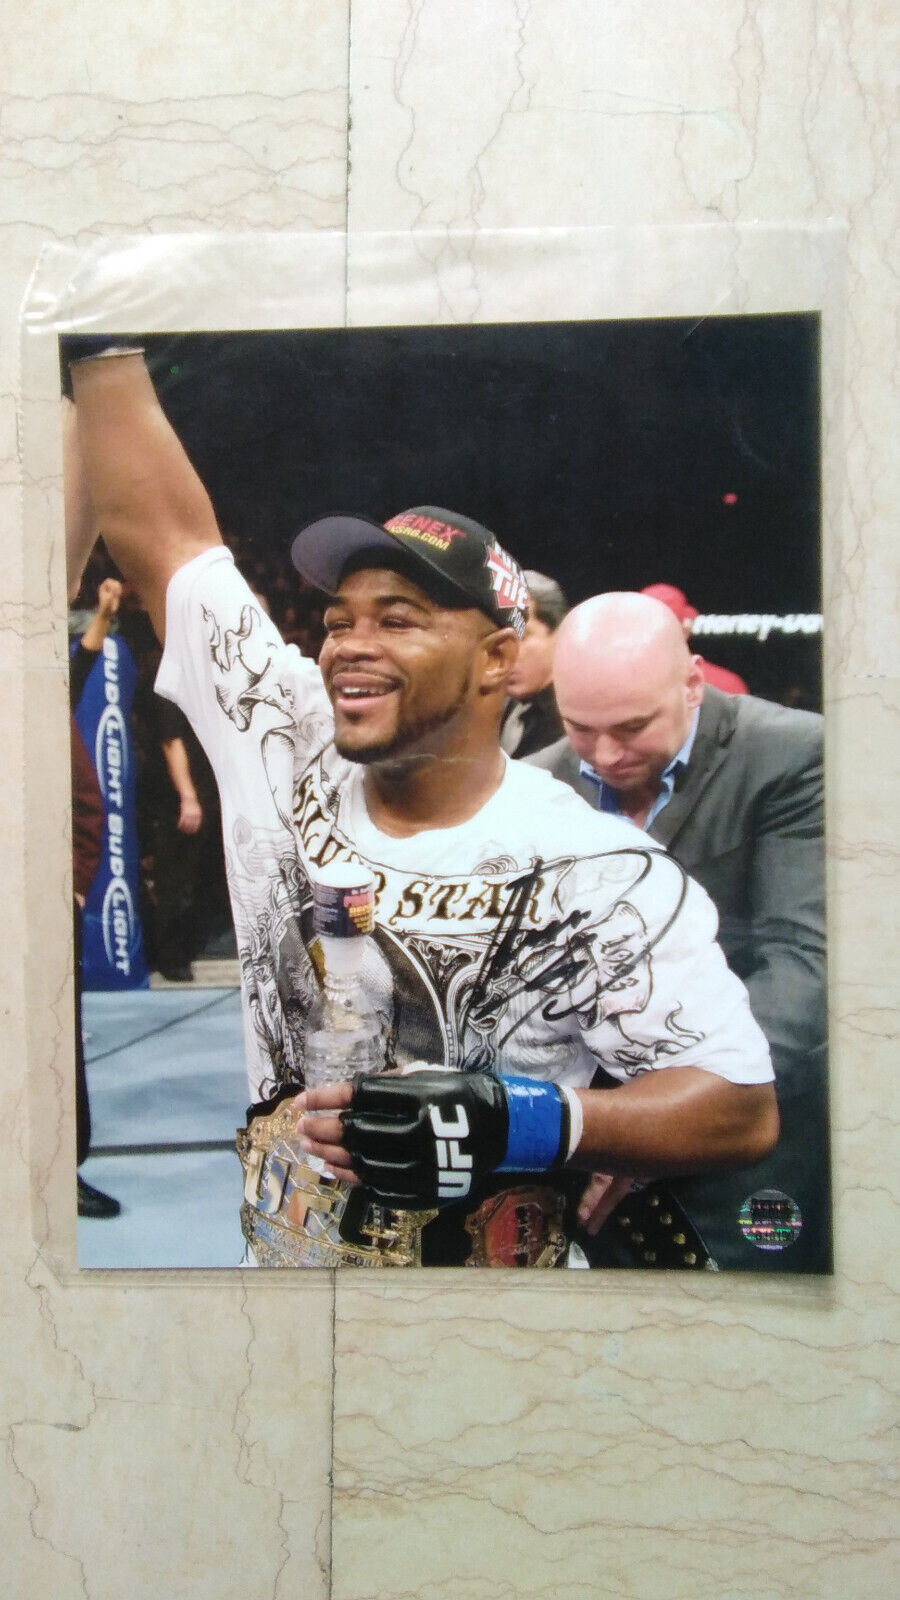 UFC SIGNED RASHAD EVANS PHOTO WITH CERTIFICATE OF AUTHENTICITY MMA SIGNATURES LLC